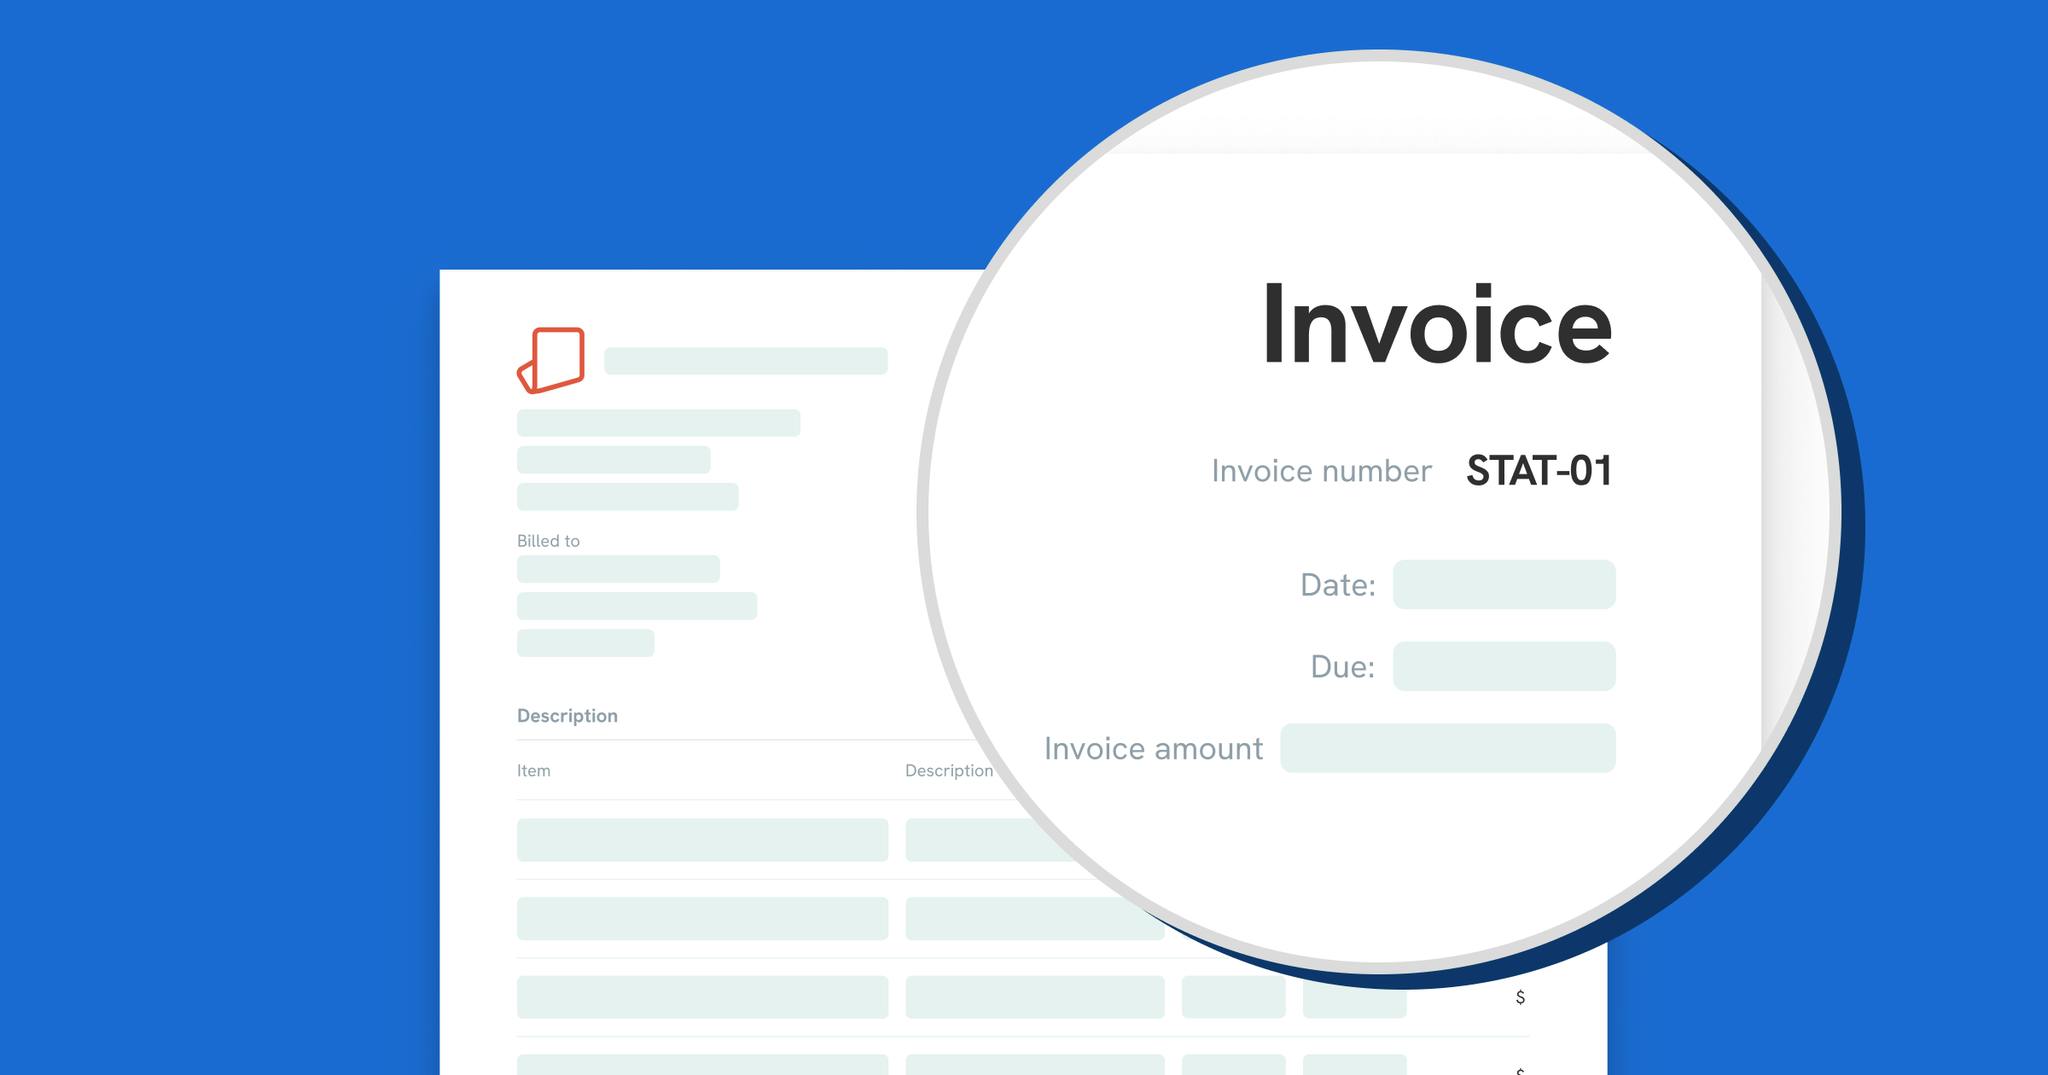 Example of complex invoice number with company abbreviation